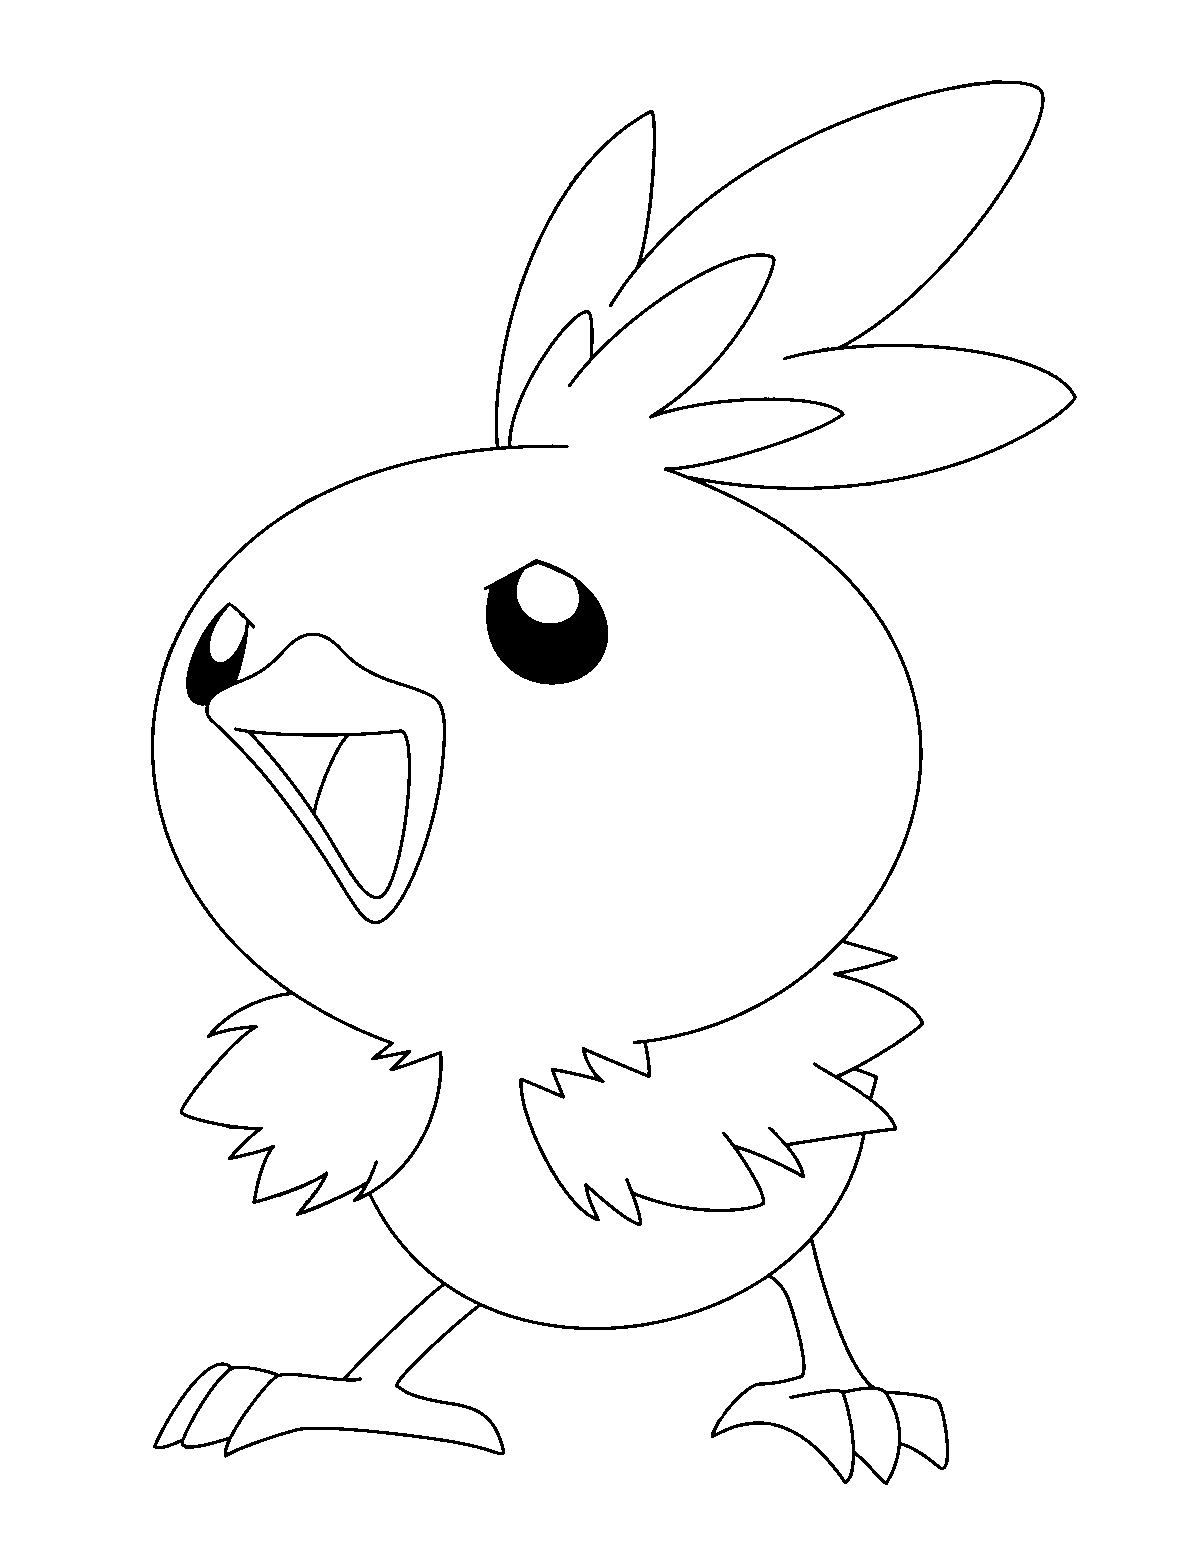 Torchic Coloring Pages - Free Printable Coloring Pages for Kids